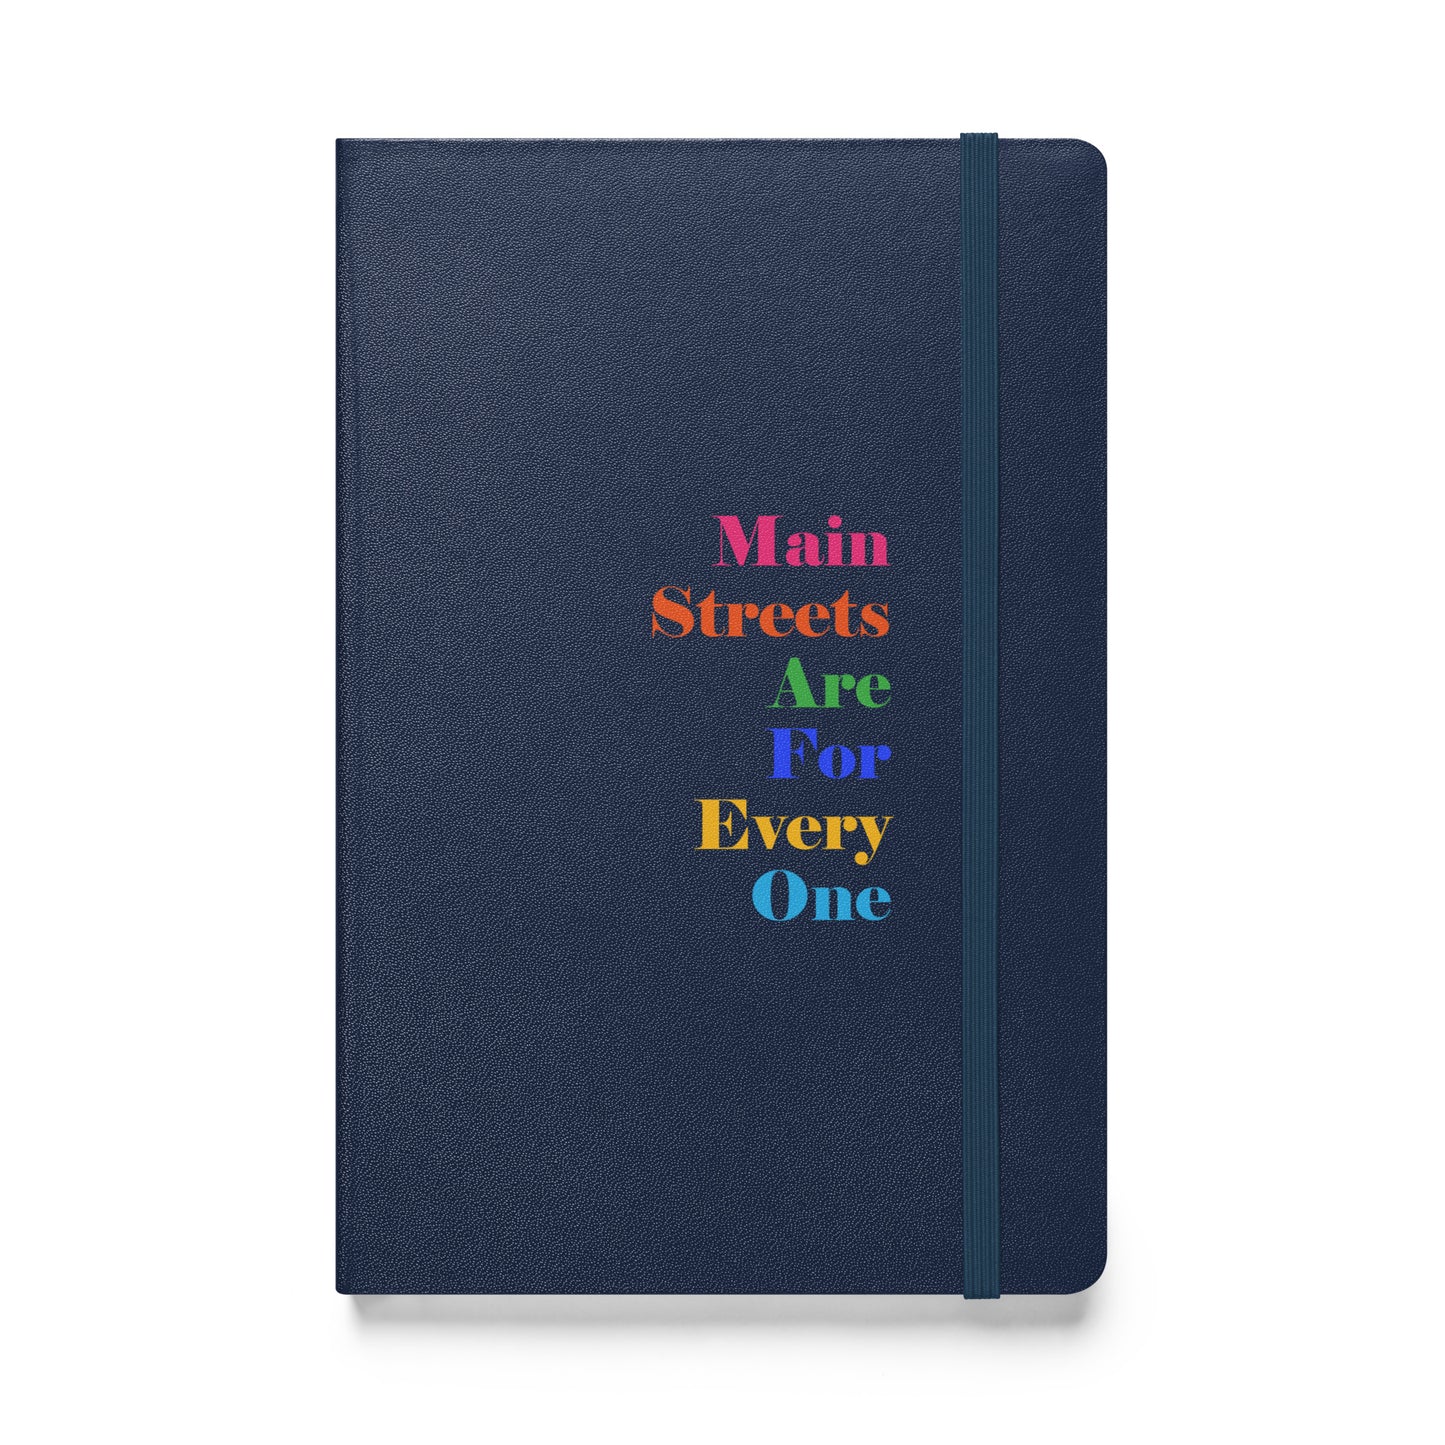 Main Streets Are For Everyone Hardcover Bound Notebook